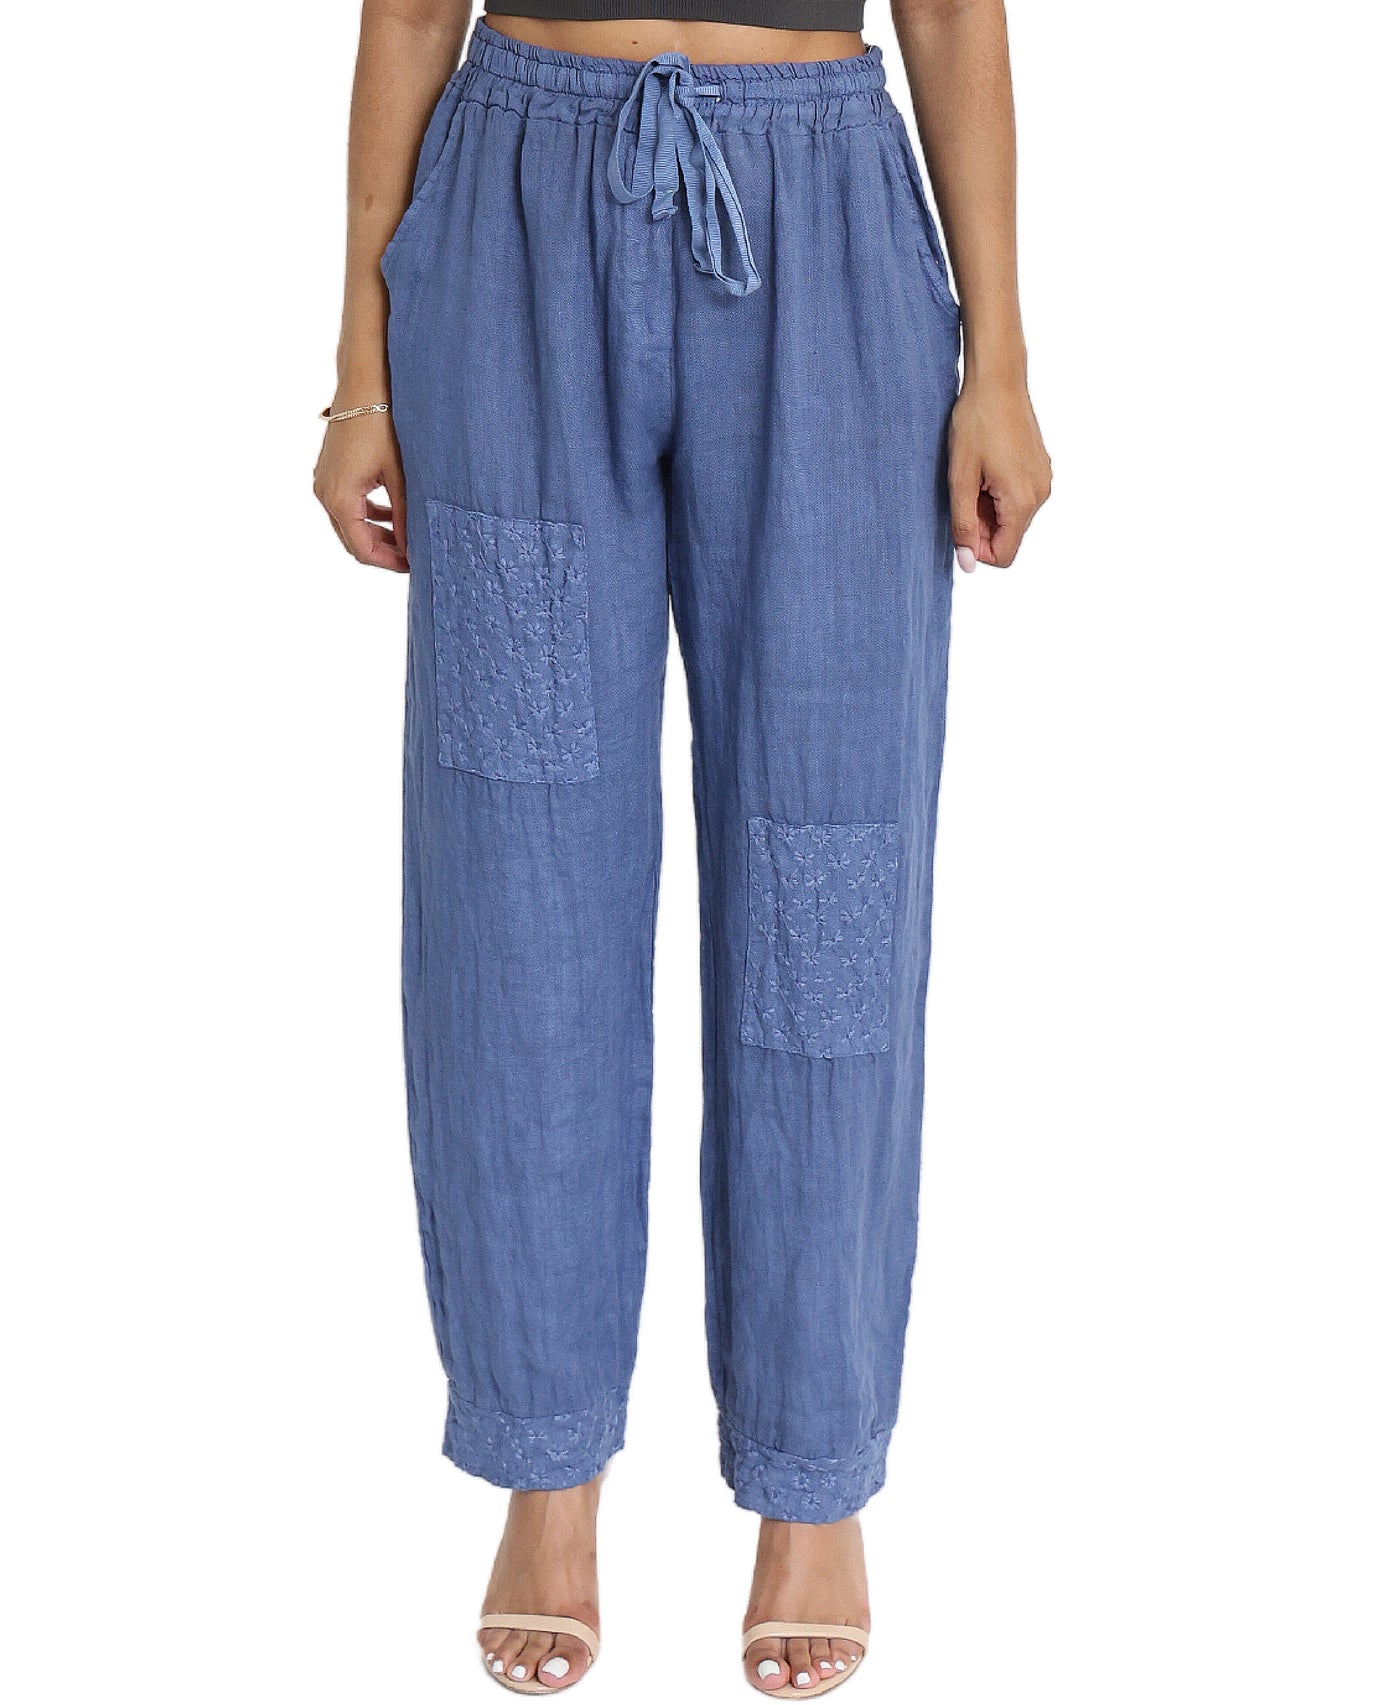 Linen Pant w/ Embroidered Patch Detail image 1